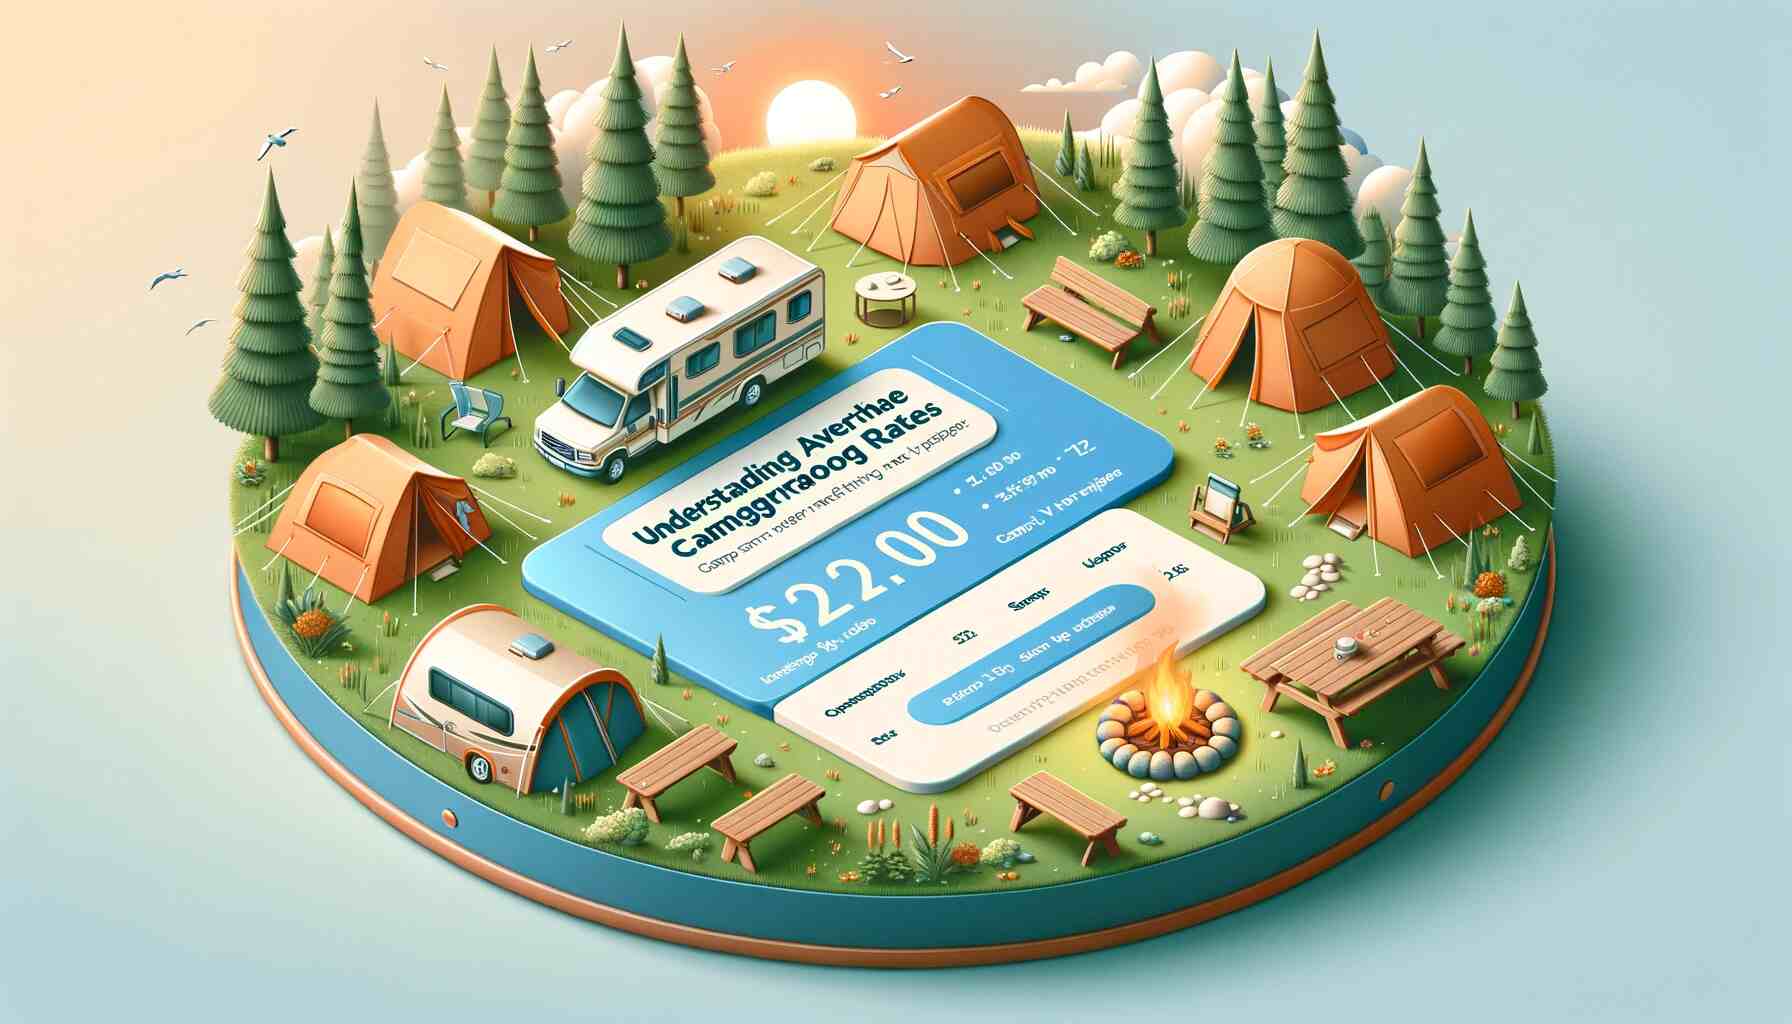 Here is the featured image Understanding Average Monthly Campground Rates: Camp Smarter, Not Pricier. This image depicts a serene campground setting, symbolizing a variety of camping styles, and is designed to be informative and appealing.